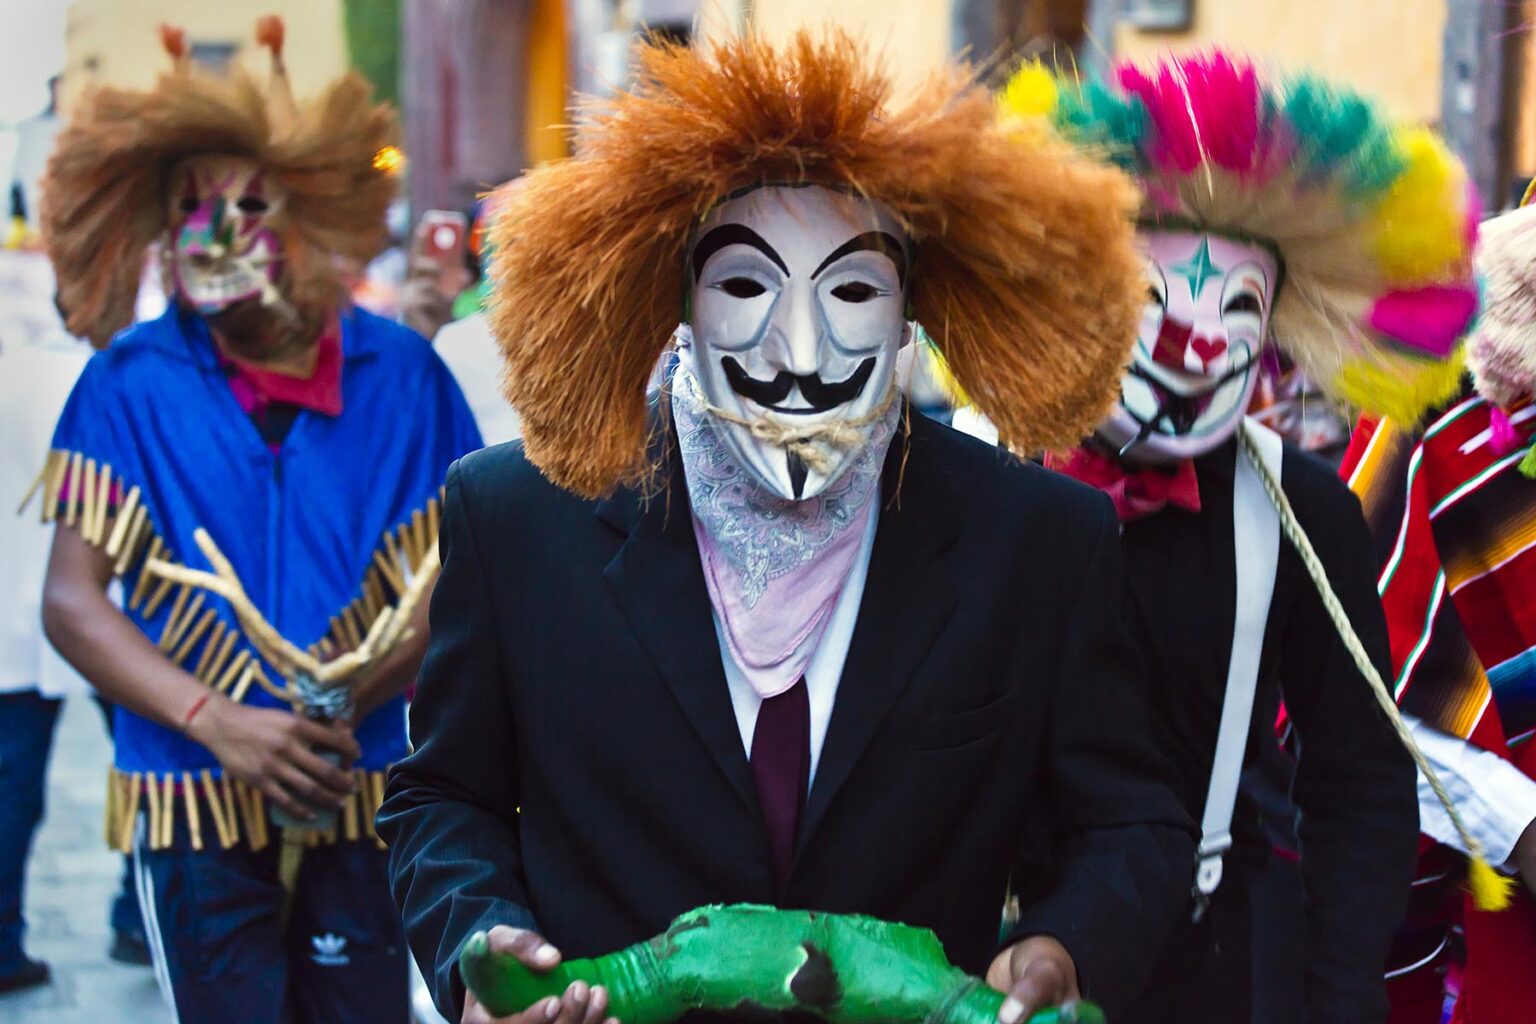 Mexicans dressed in Guy Fox costumes during a parade celebrating the anniversary of the city - SAN MIGUEL DE ALLENDE, MEXICO